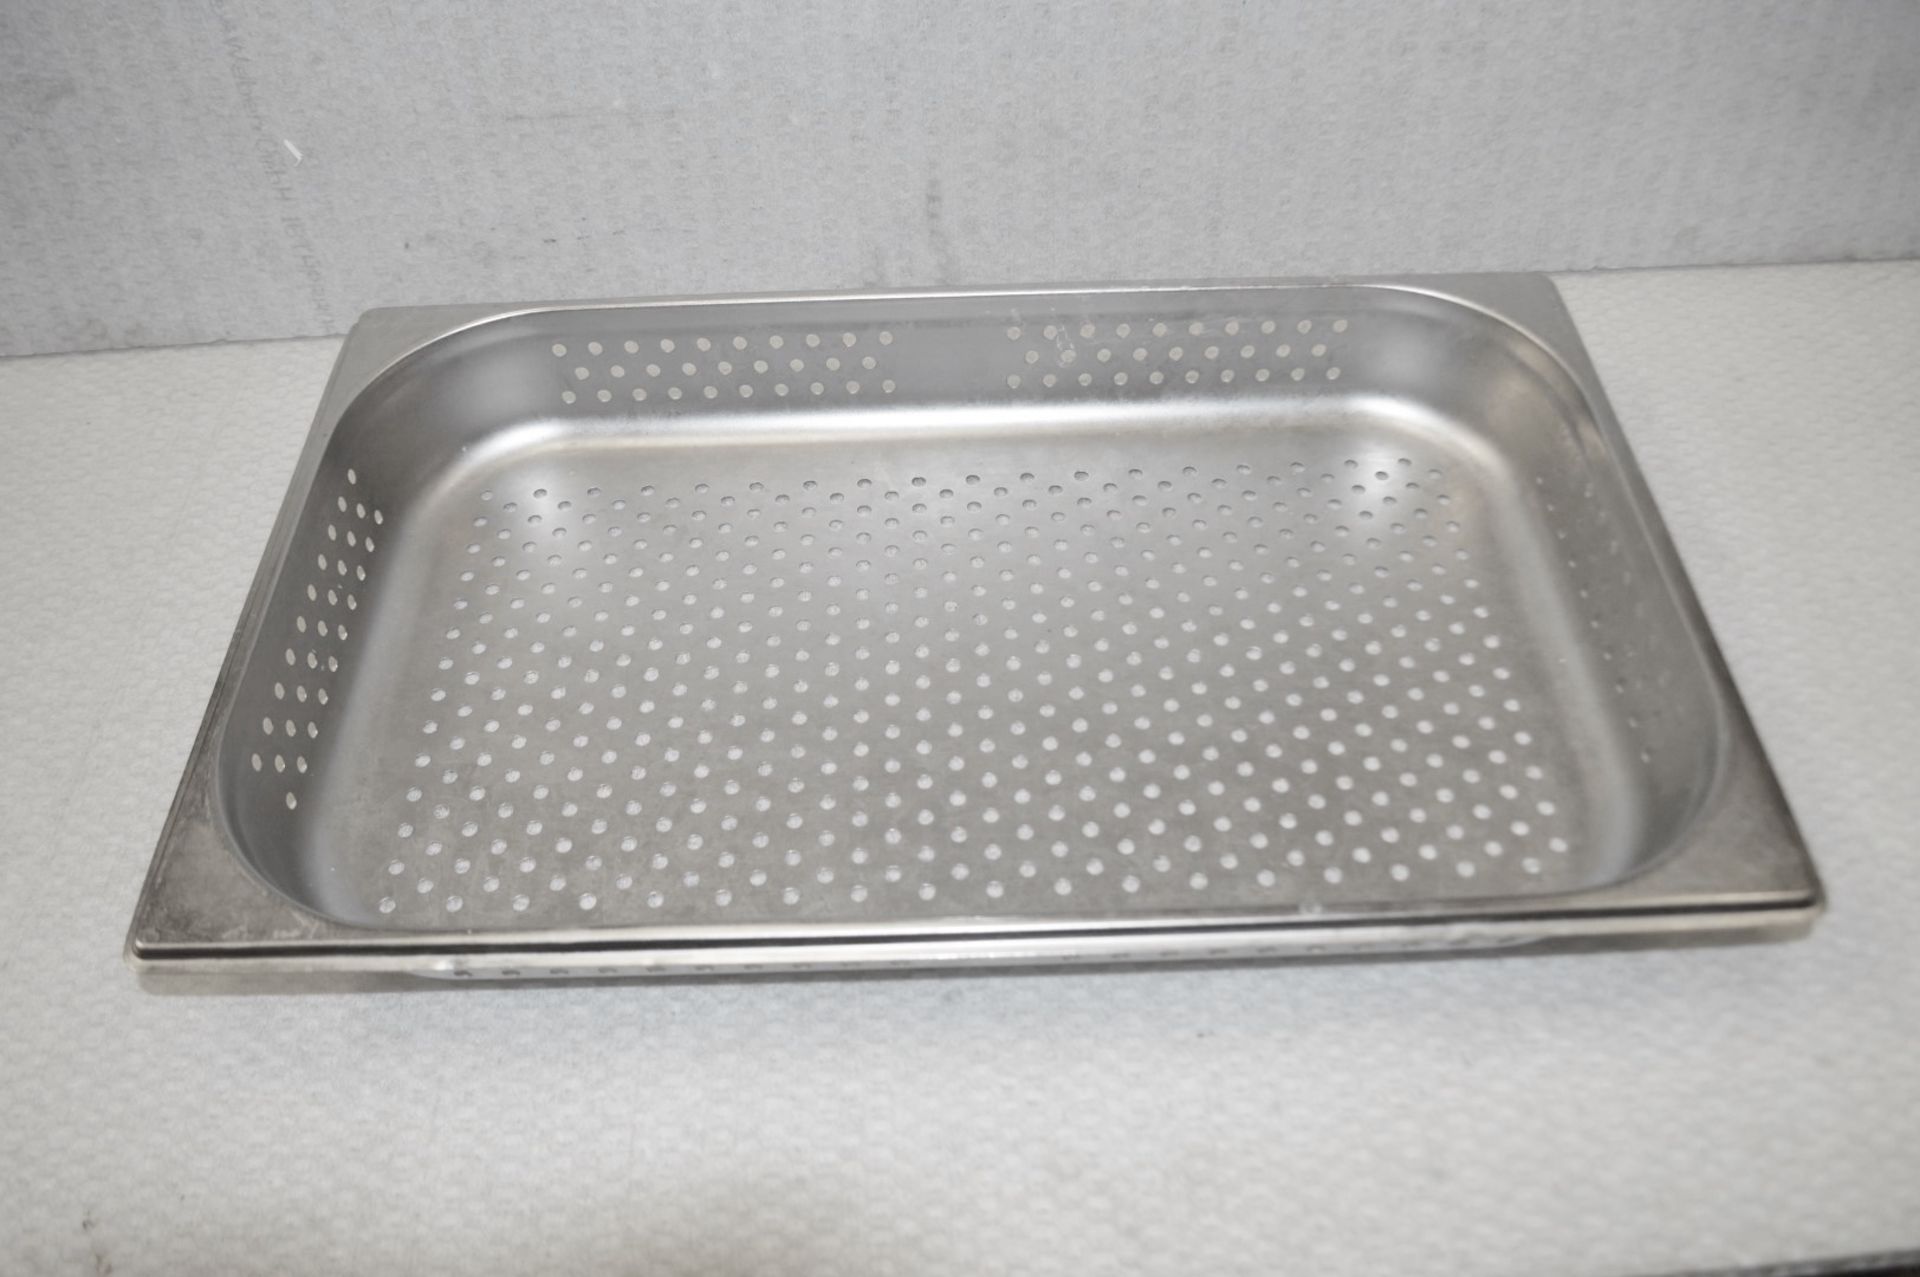 10 x Stainless Steel Perforated Gastronorm Trays - Dimensions: L53 x W33 x D6cm - Recently Removed - Image 2 of 2